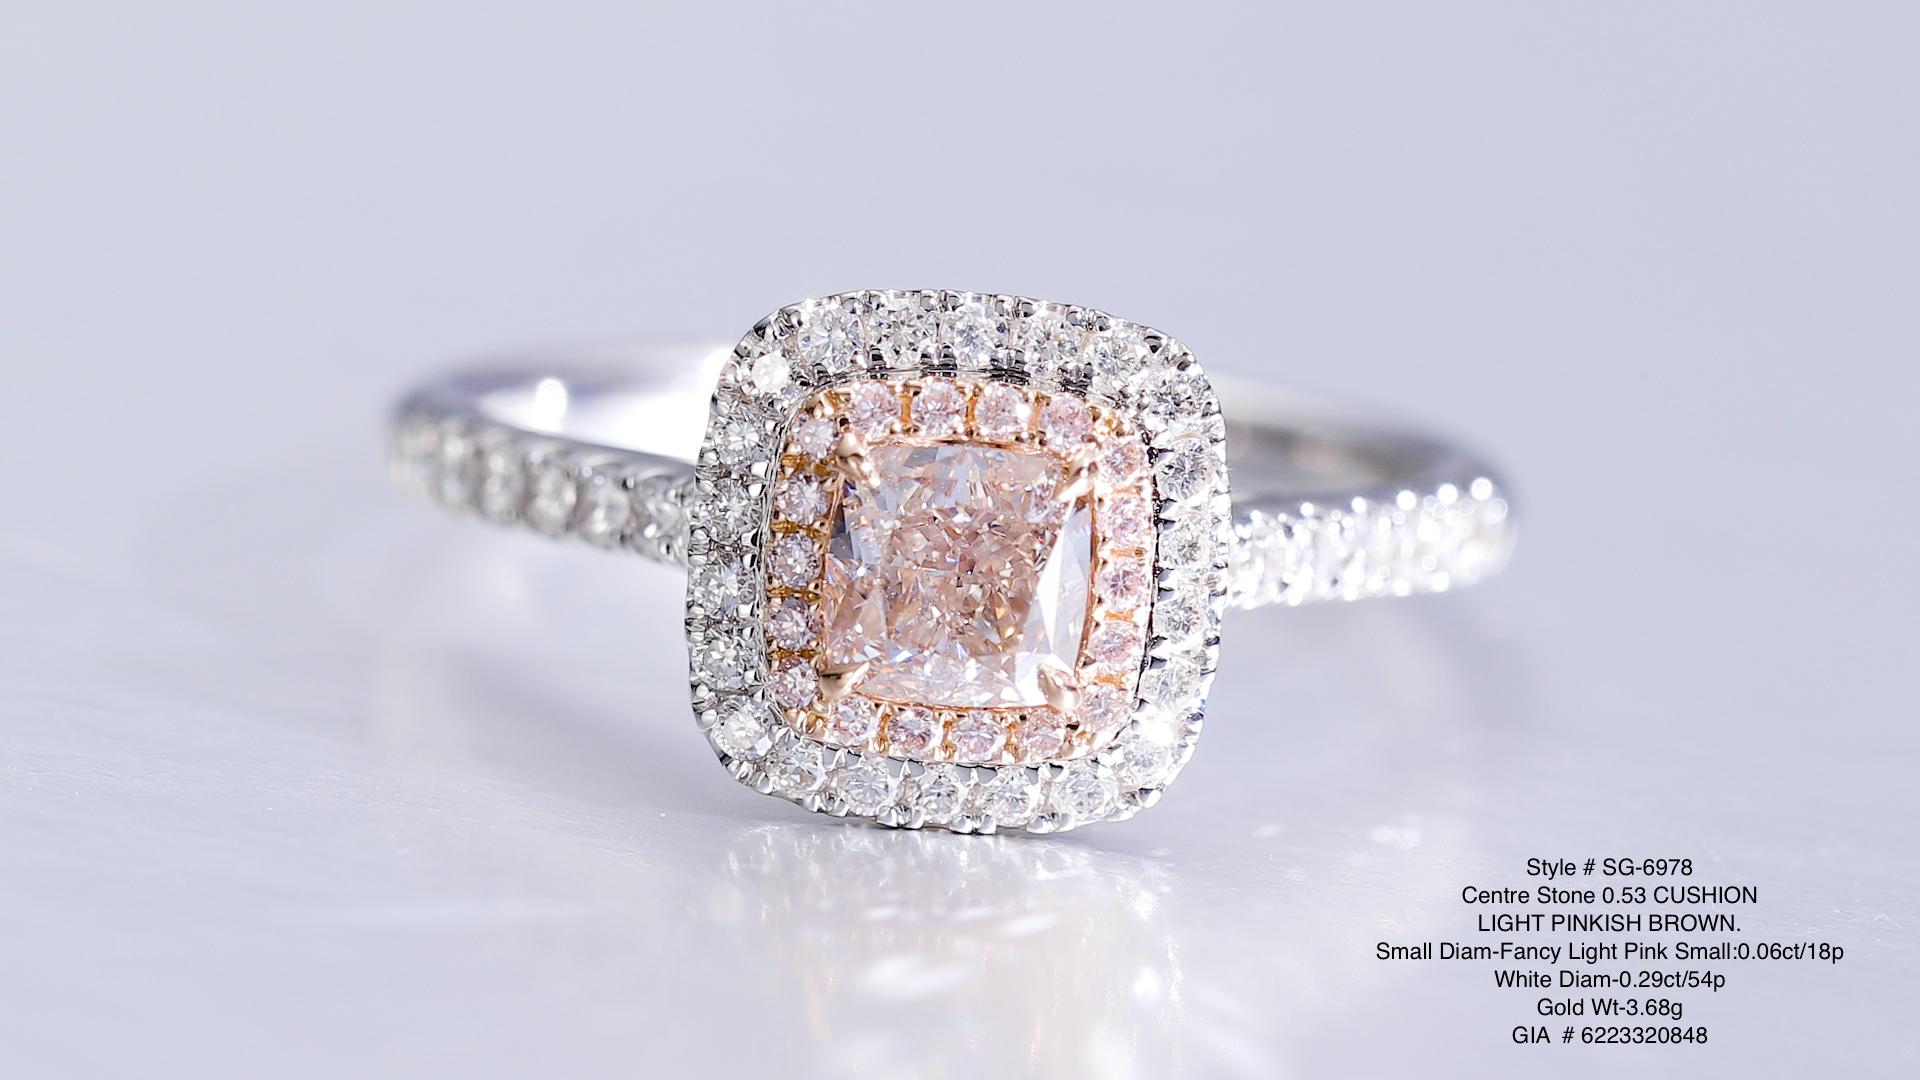 0.53ct Light Pinkish Brown Cushion cut natural diamond mounted on 18KT gold, with small round pink diamonds in halo and white diamond on the side.


This 0.53ct light pinkish brown solitaire ring, a true embodiment of elegance. The centerpiece